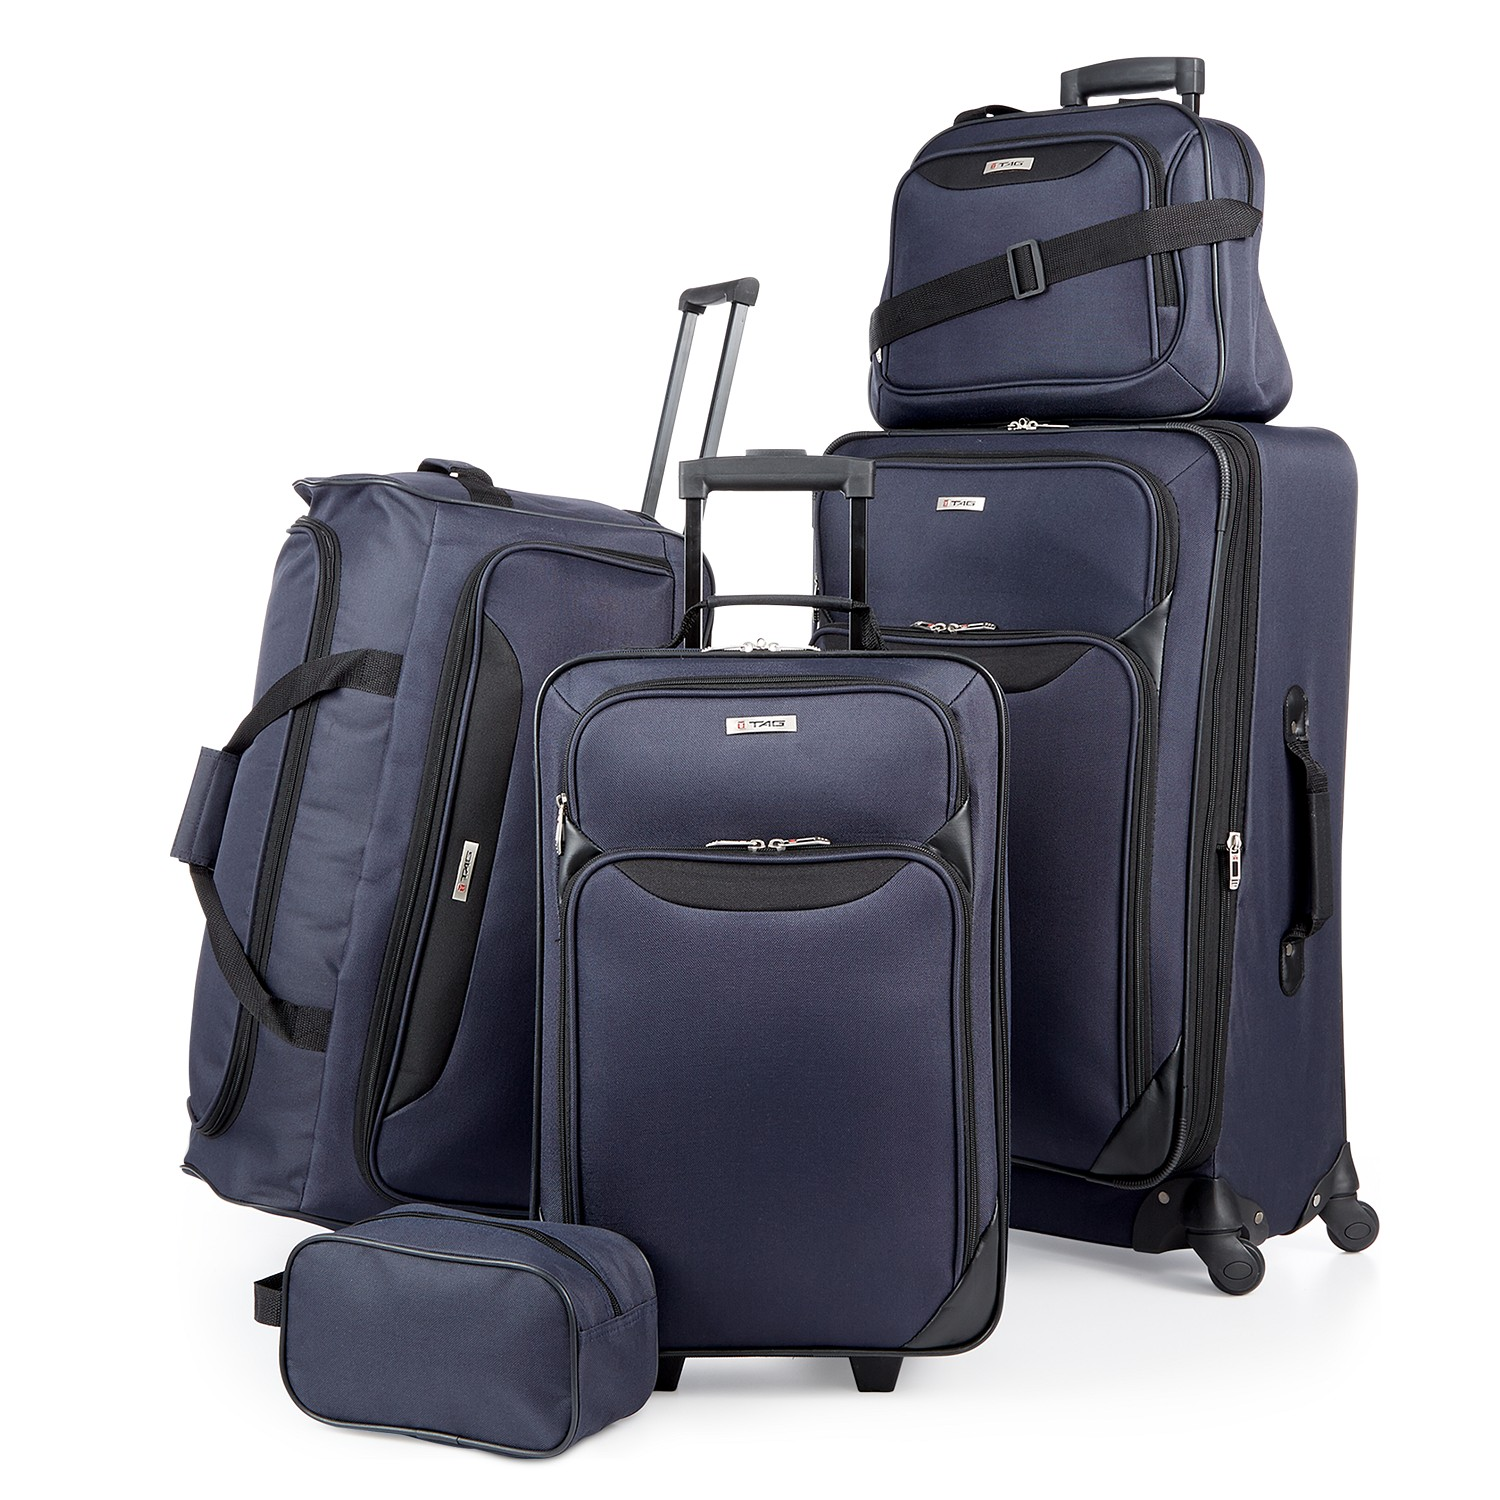 Tag Springfield III 5 Piece Luggage Set Only $59.99 Shipped! Great Reviews + Lowest Price!